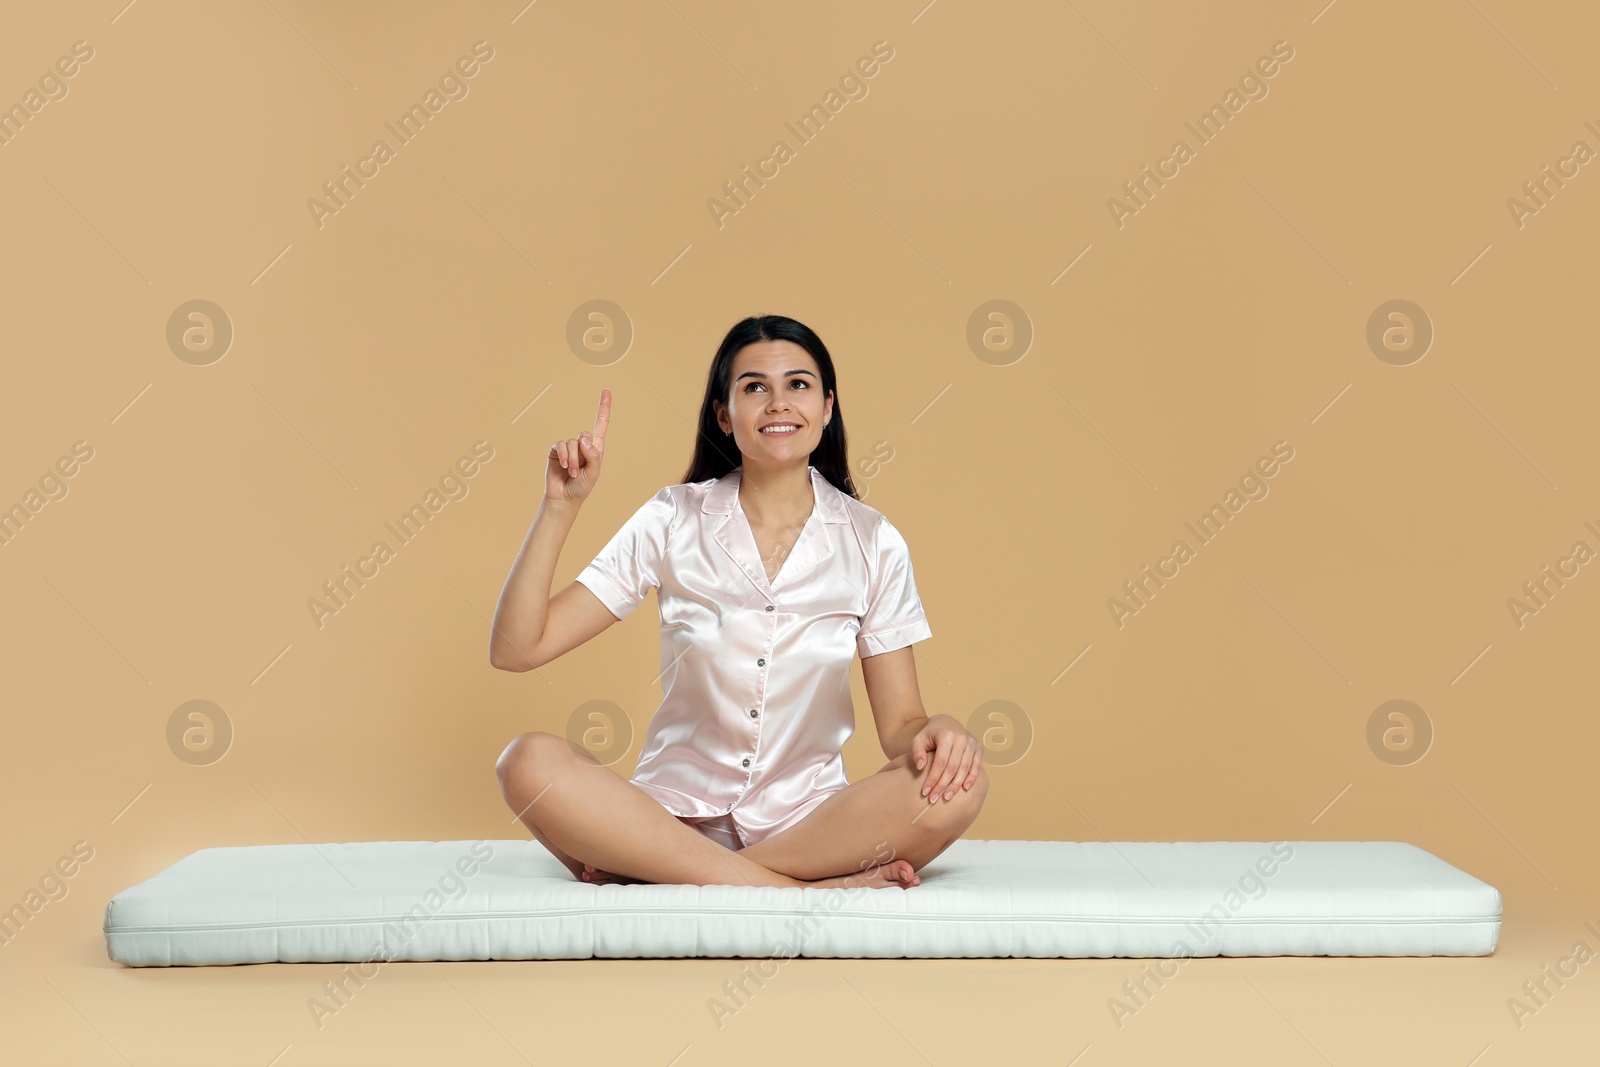 Photo of Young woman sitting on soft mattress and pointing upwards against beige background